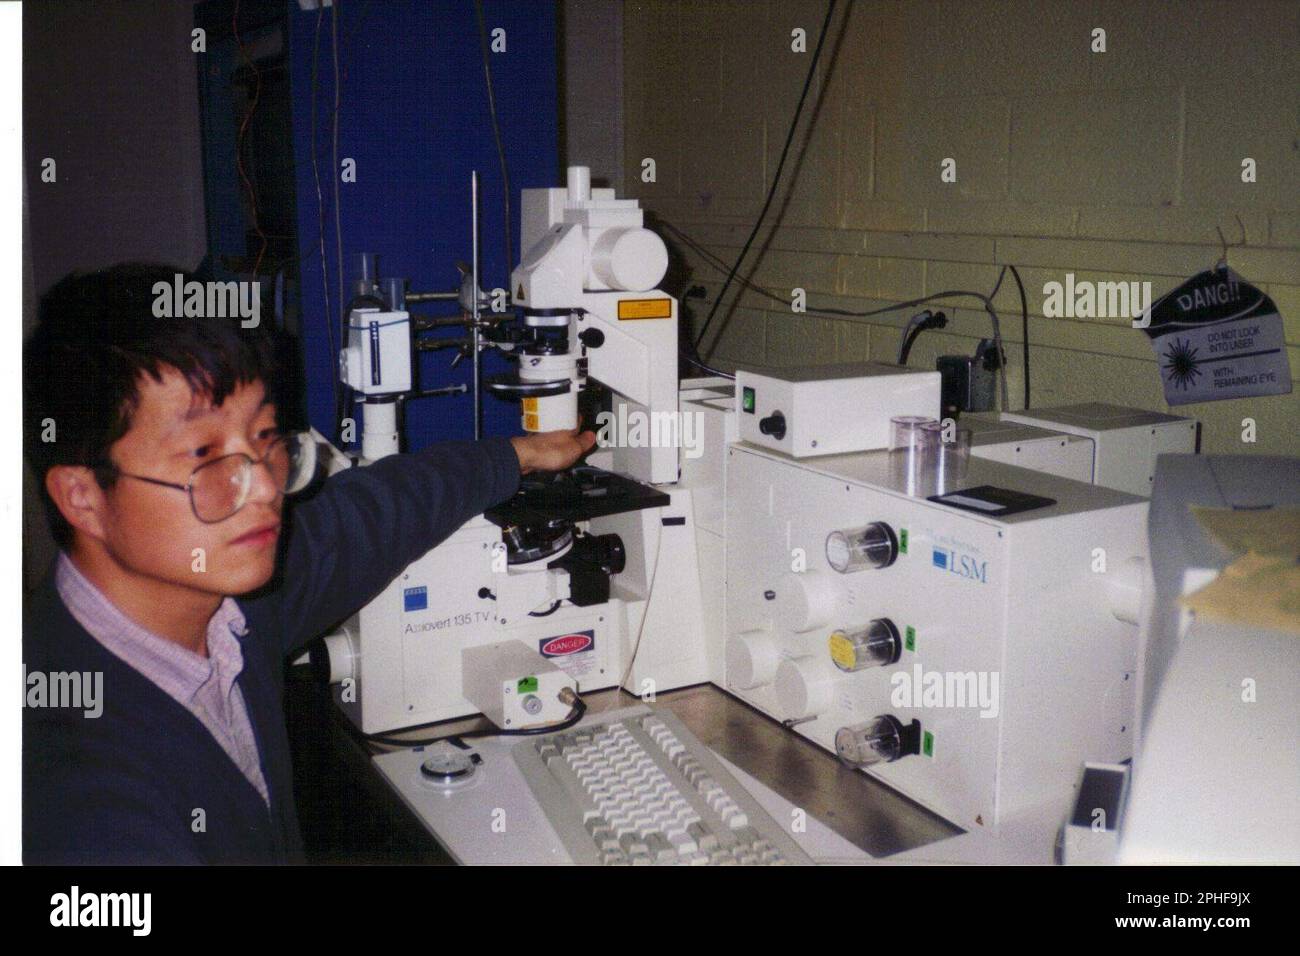 Beijing, China. 28th Mar, 2023. This undated file photo provided by the interviewee shows Cheng Heping, now a leading Chinese biomedical expert, operating a confocal microscope in a research lab in Maryland, the Untied States back in 1995. TO GO WITH 'Profile: A brain scientist's decades-long focus on photons' Credit: Xinhua/Alamy Live News Stock Photo